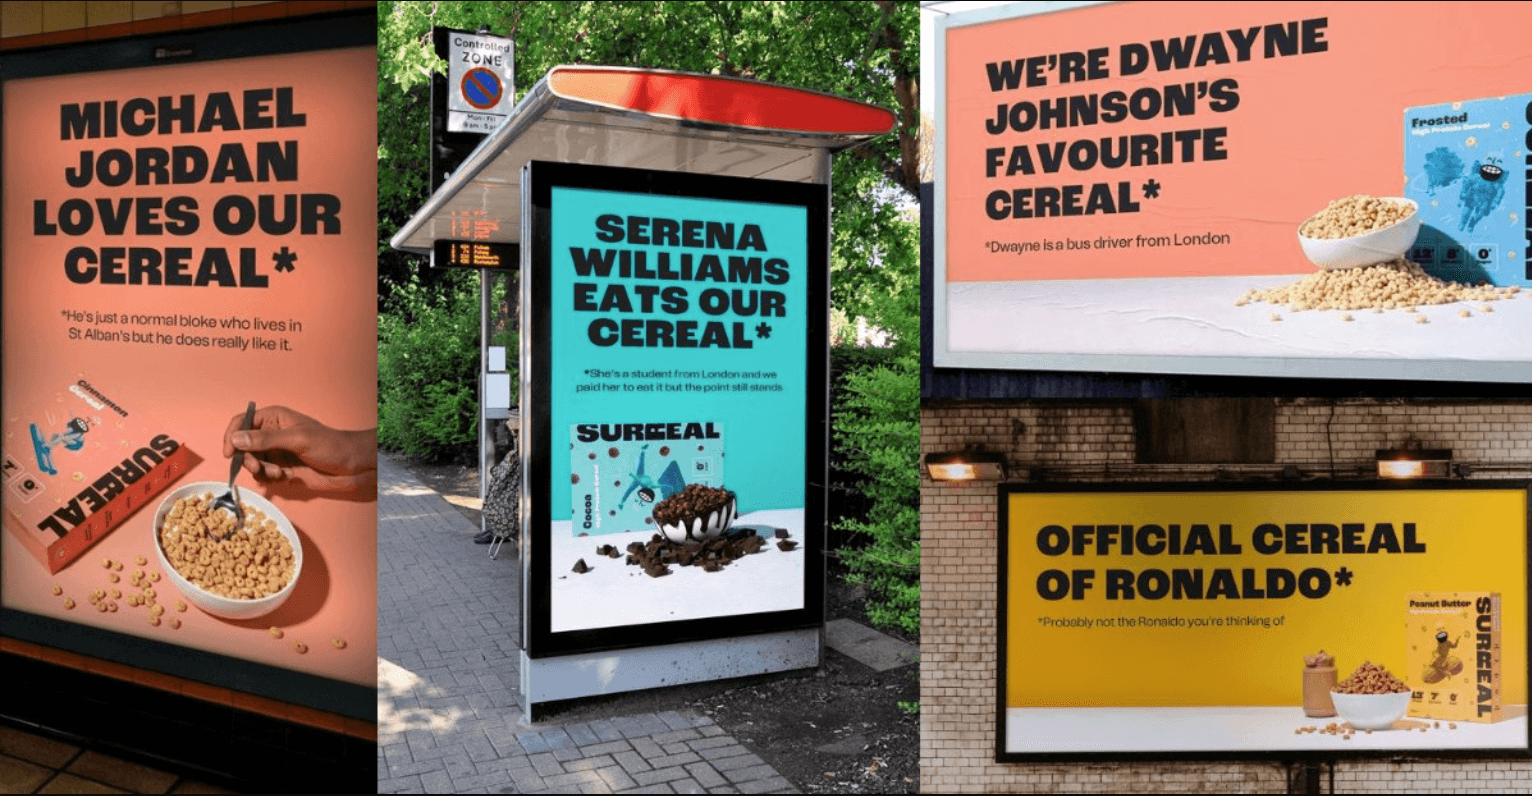 Photos of Surreal's billboards, including one that reads "Michael Jordan loves our cereal* ... *He's just a normal bloke who lives in St Alban's, but he really does like it."